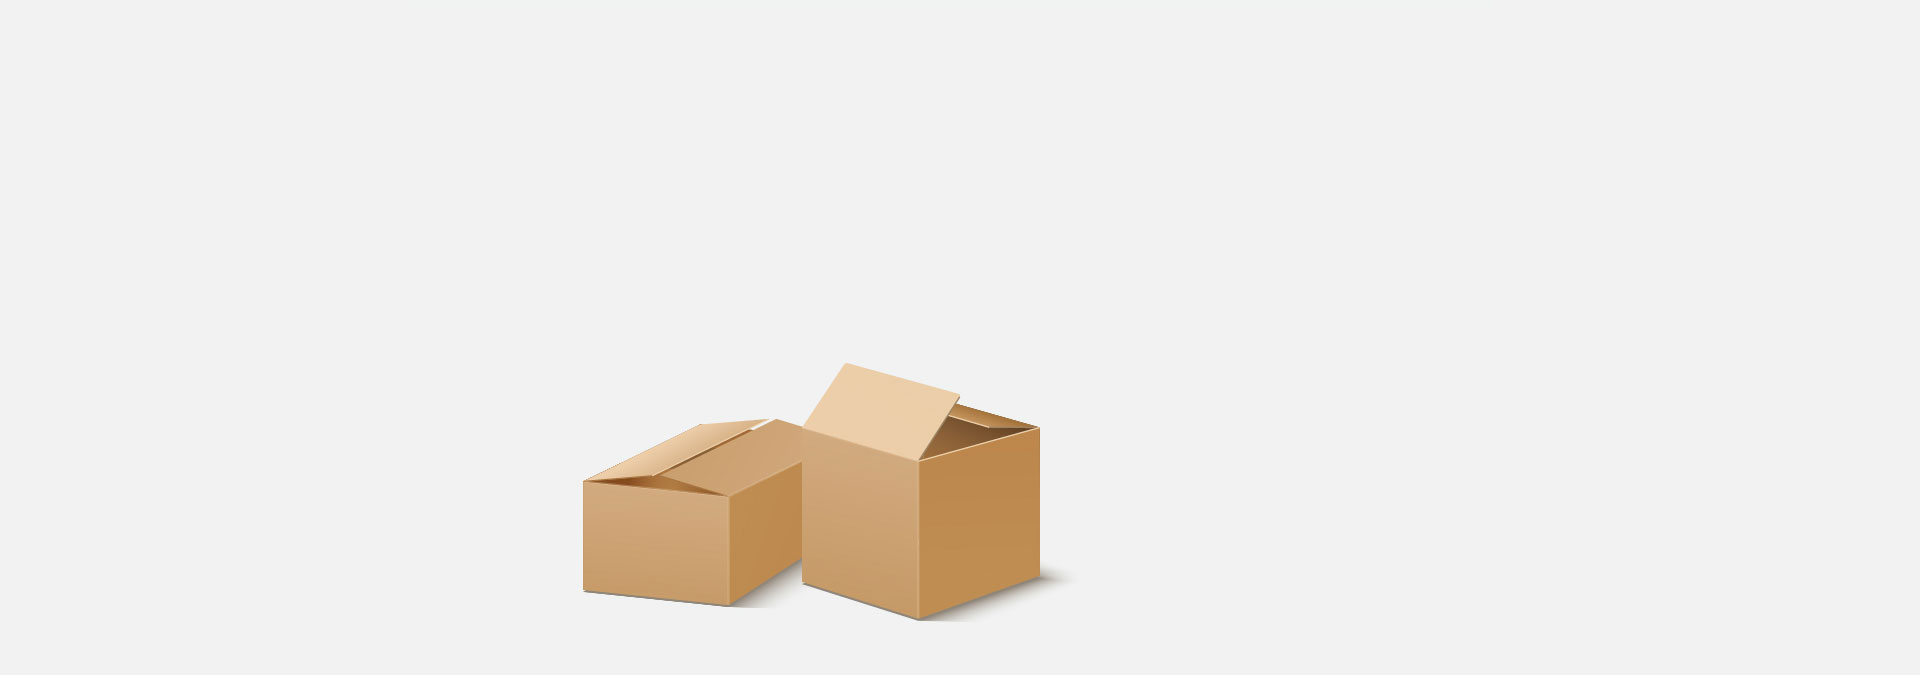 Our Packaging Supplies Will Protect Your Products